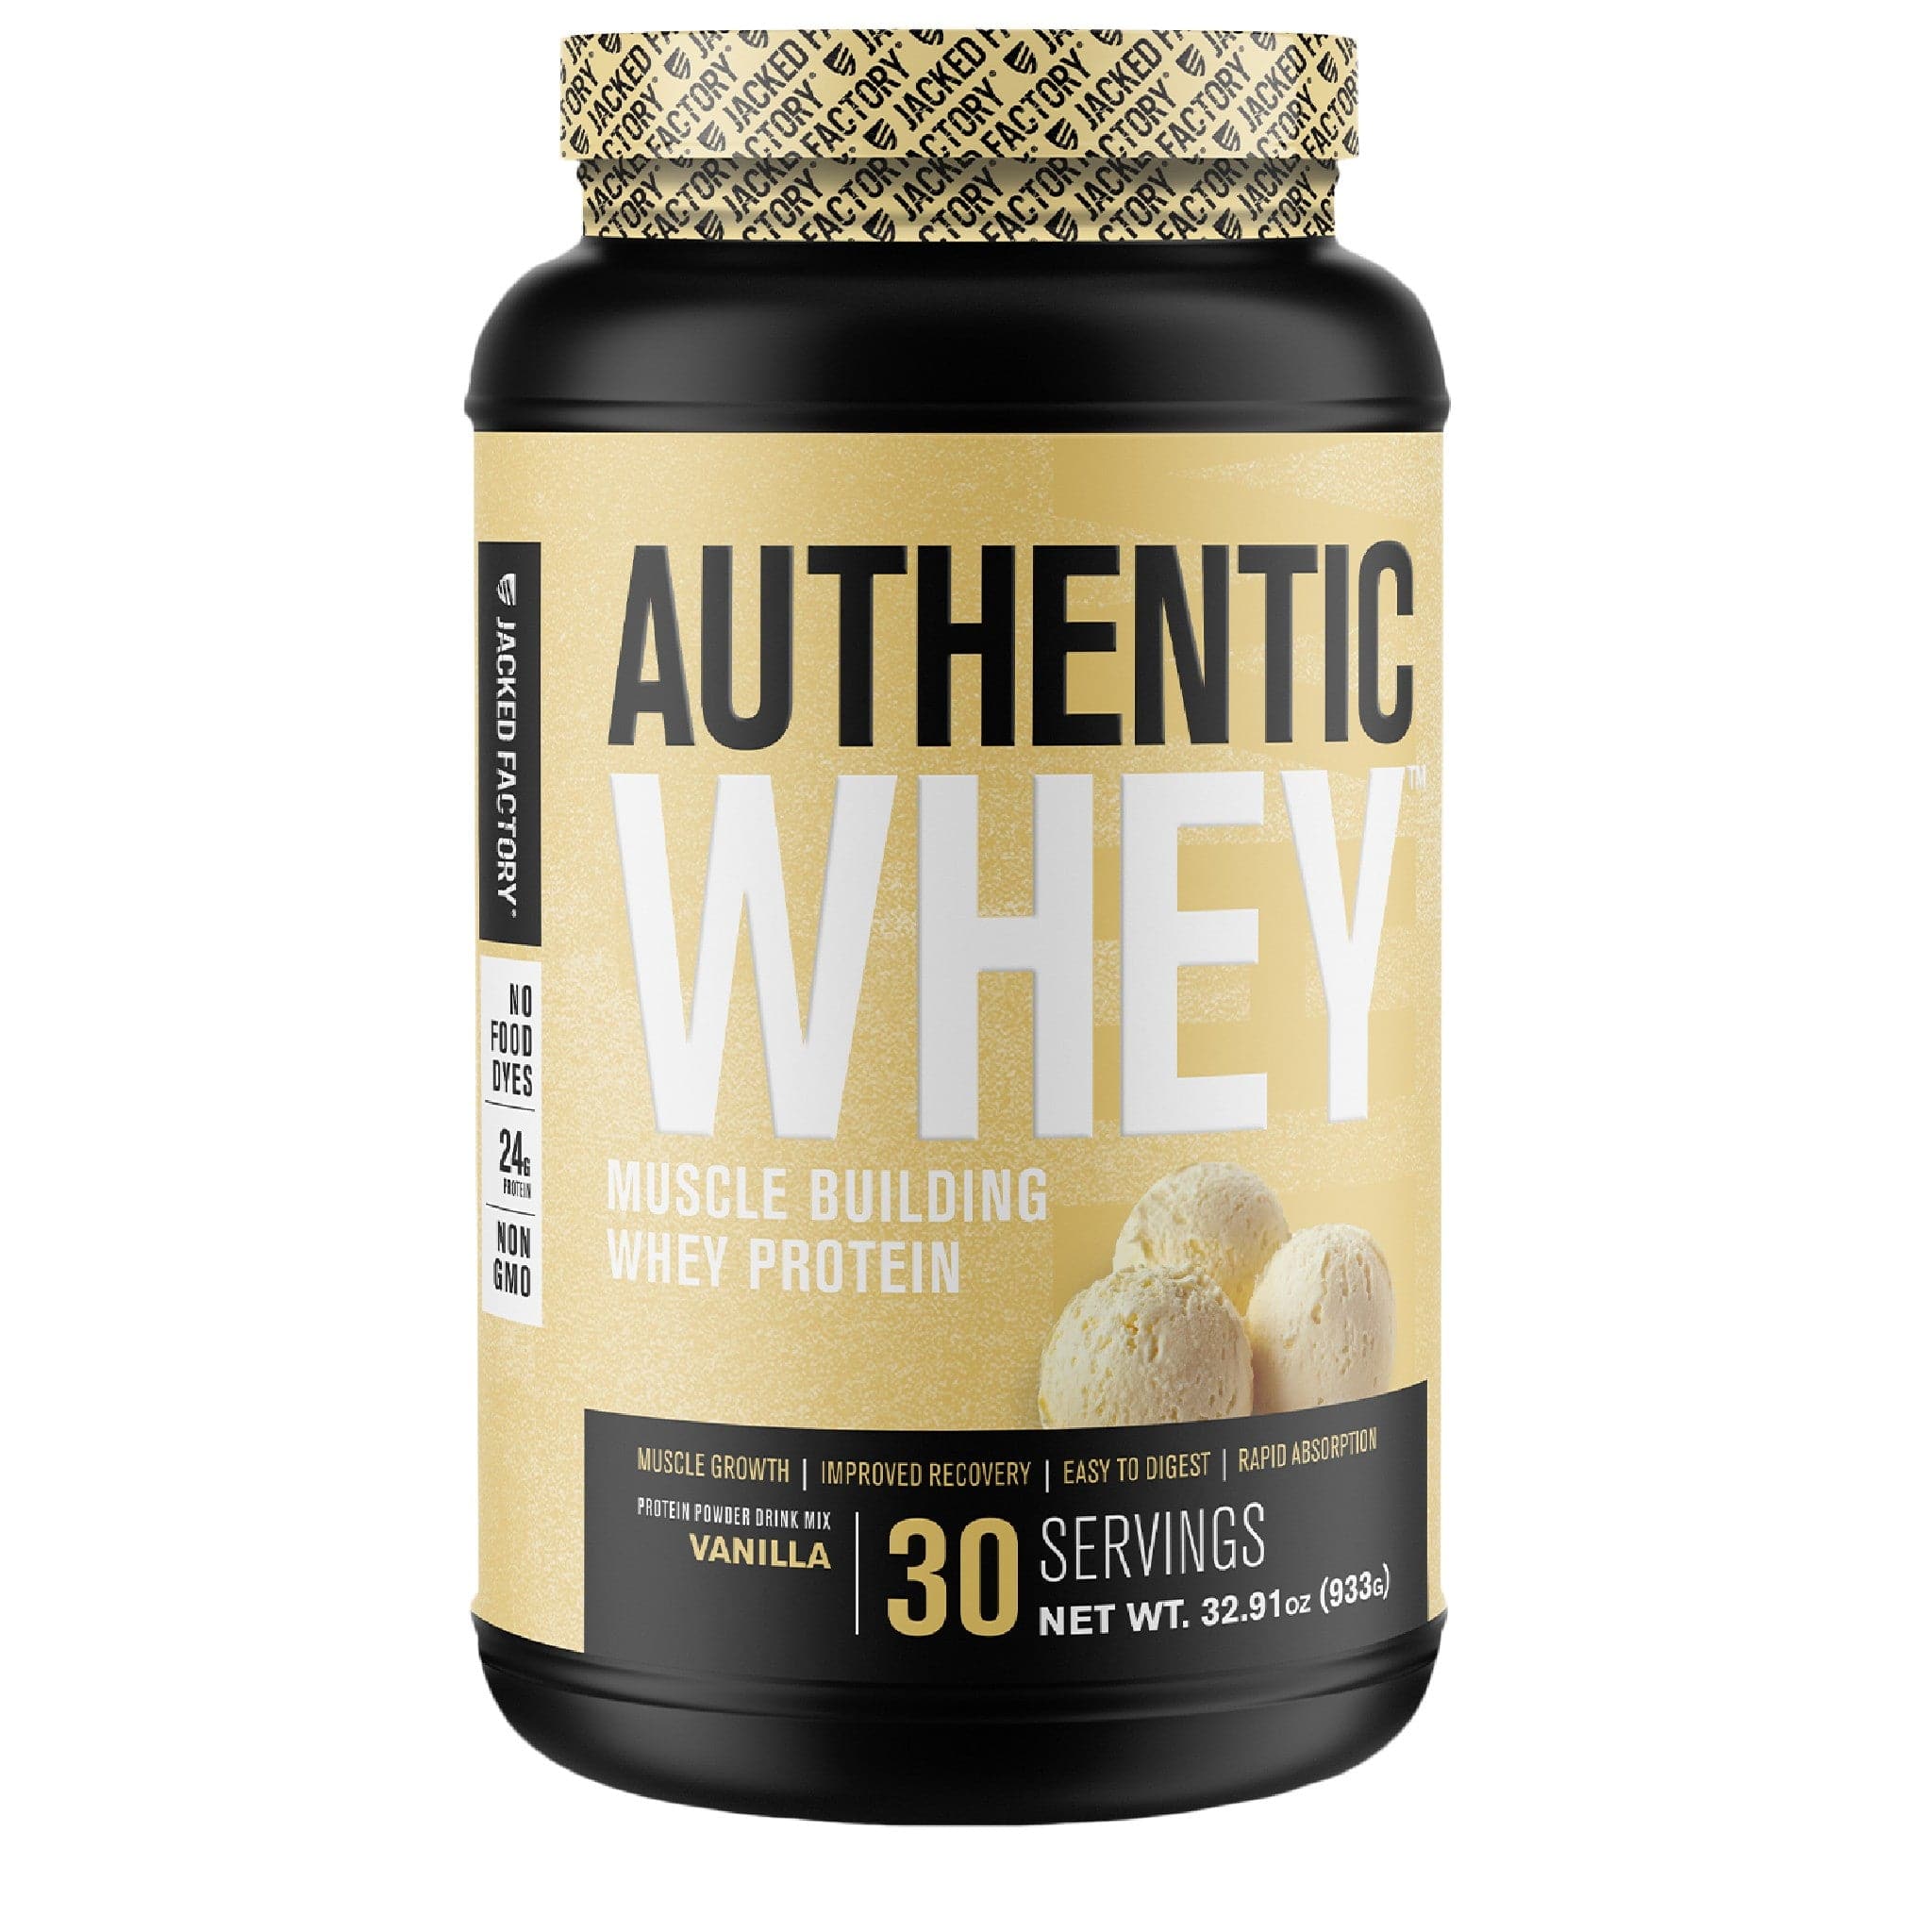 Jacked Factory Authentic Whey 30 serving